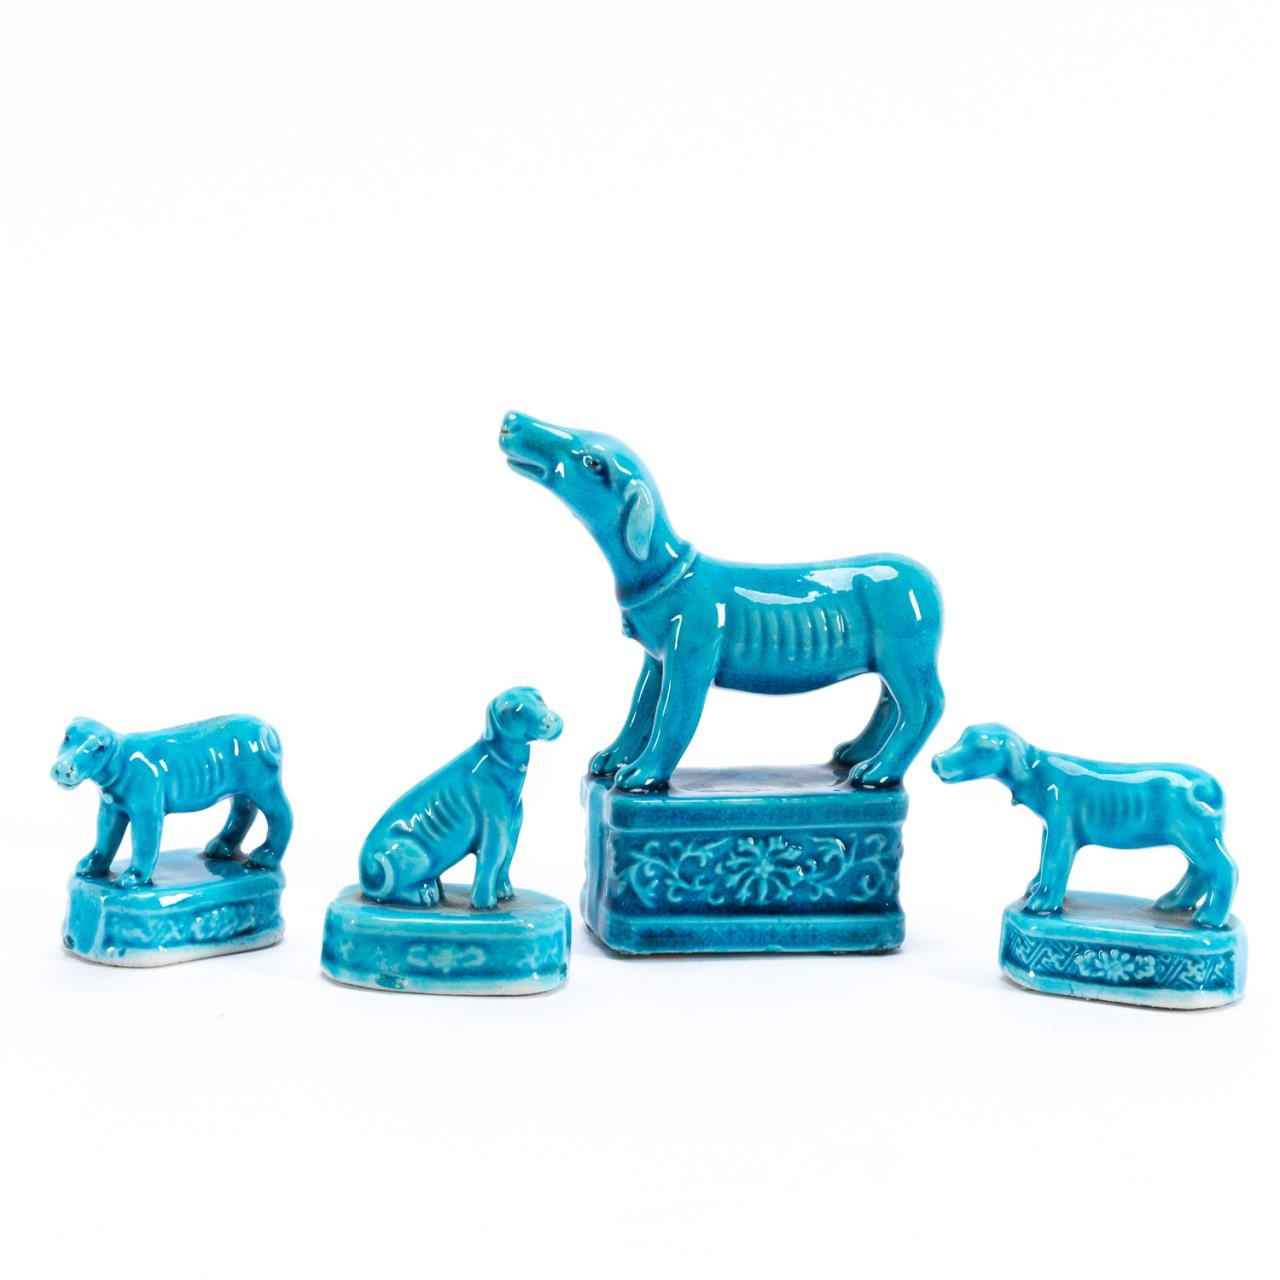 CHINESE GROUP 4 SMALL TURQUOISE